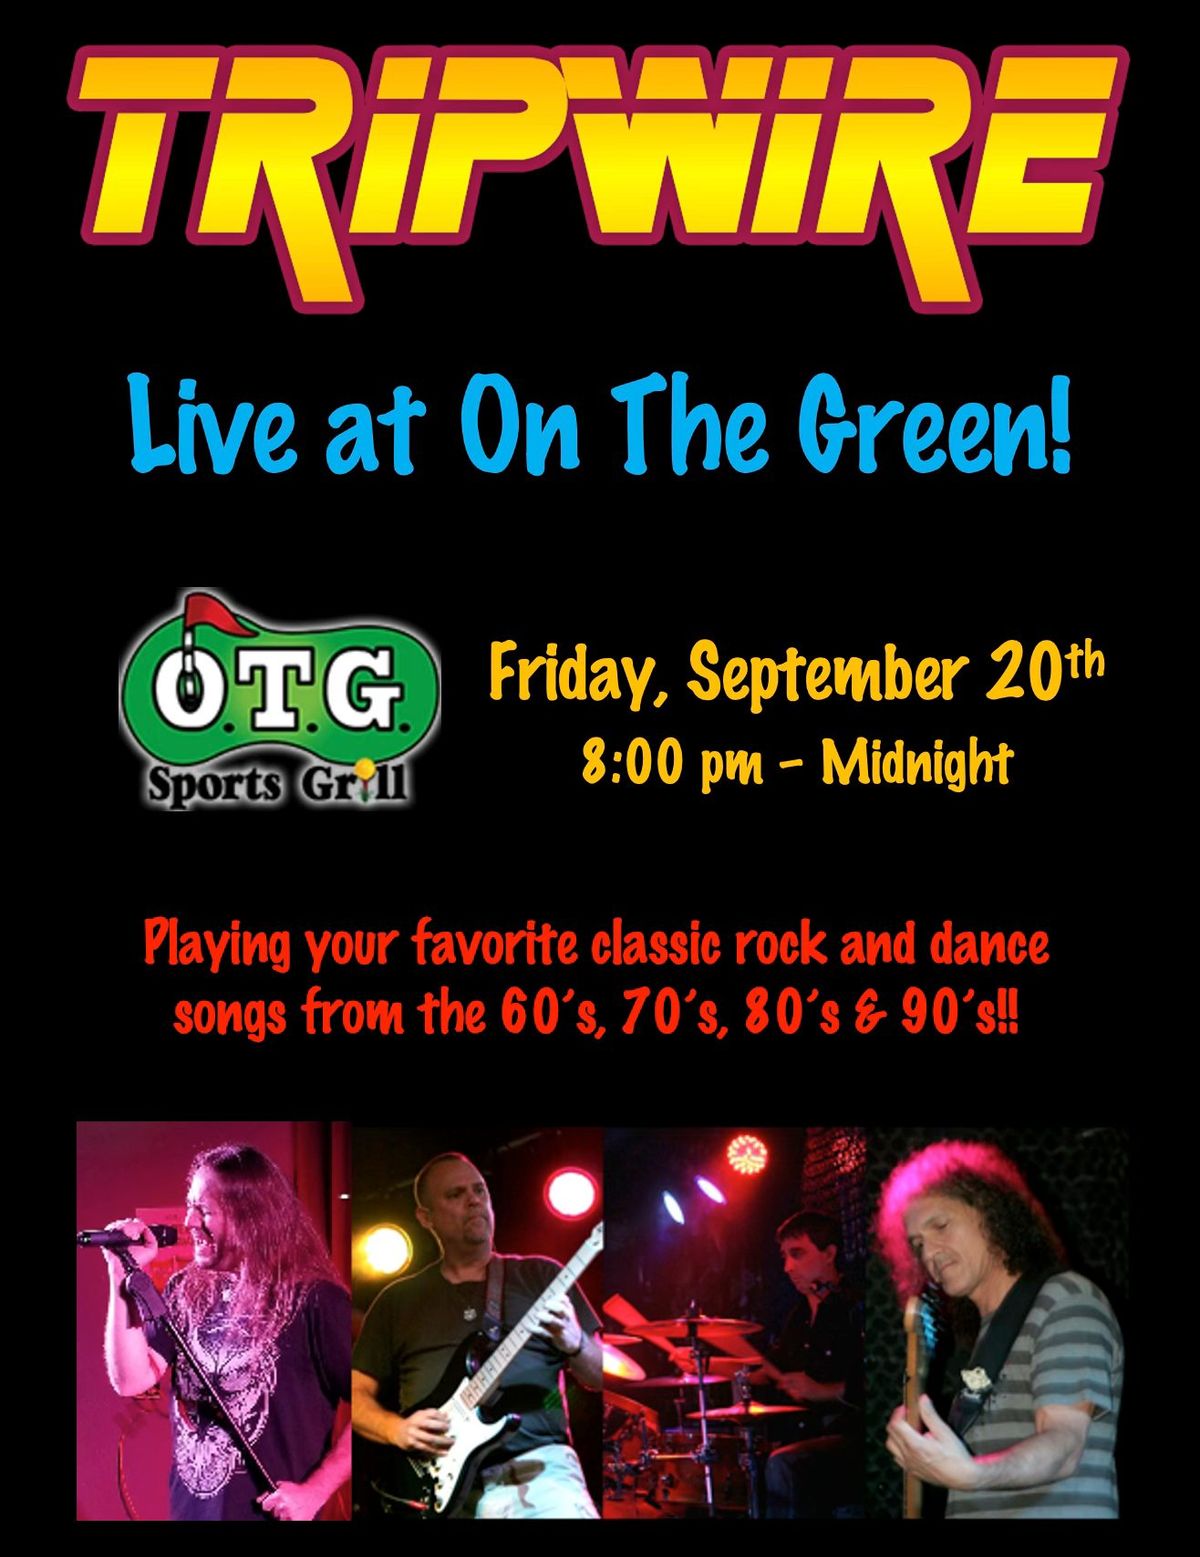 Tripwire Returns to On The Green!